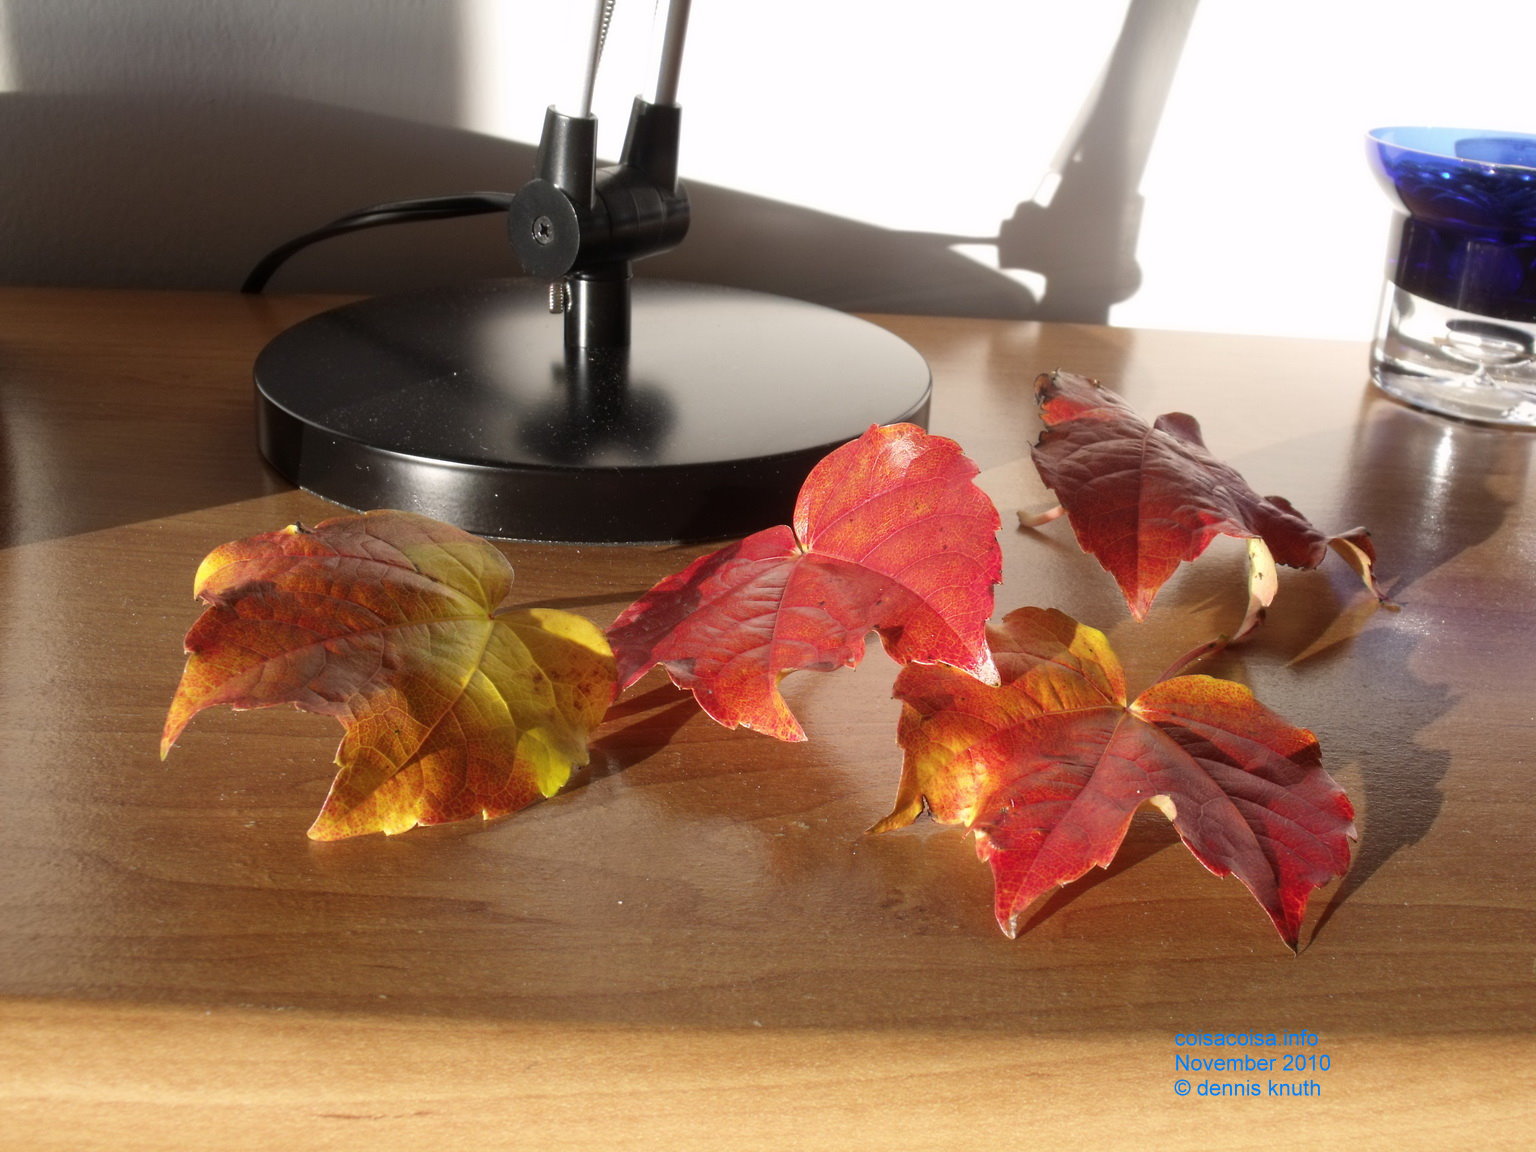 Autumn leaves in Dennis Knuth's Bedroom